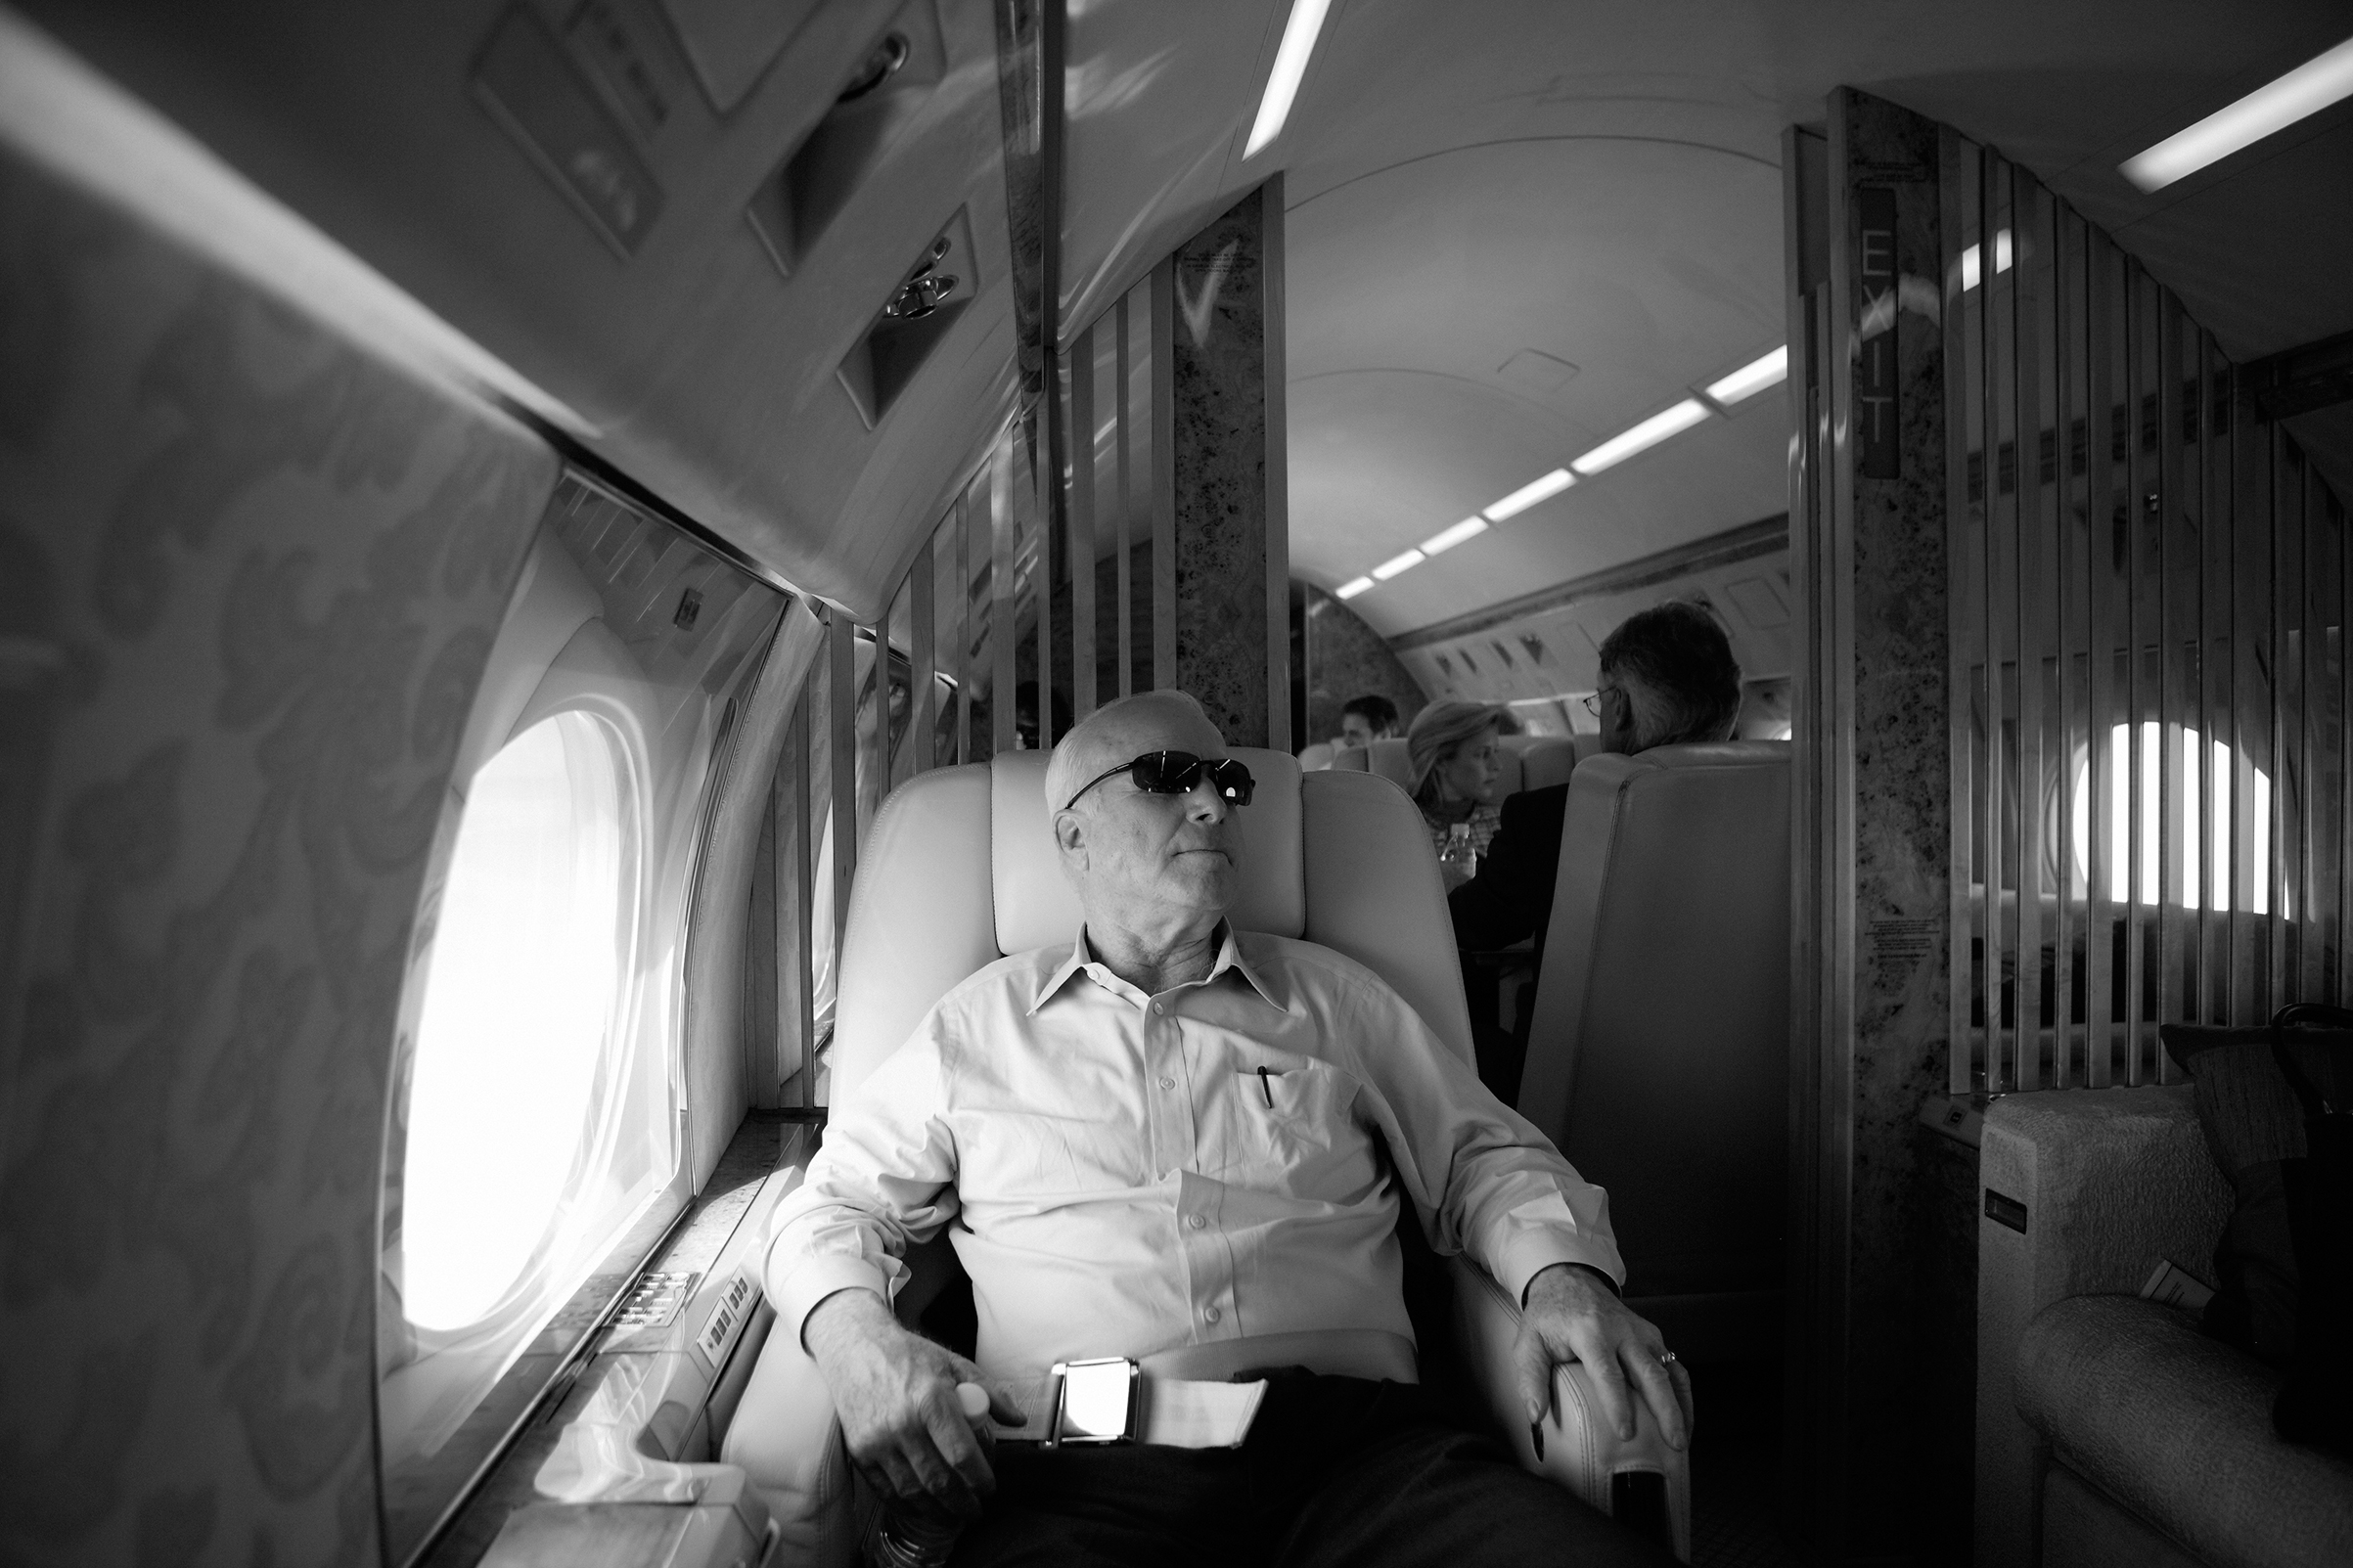 Sen. John McCain on board his private plane during presidential campaign stops in South Carolina on April 26, 2007. (Christopher Morris—VII for TIME)